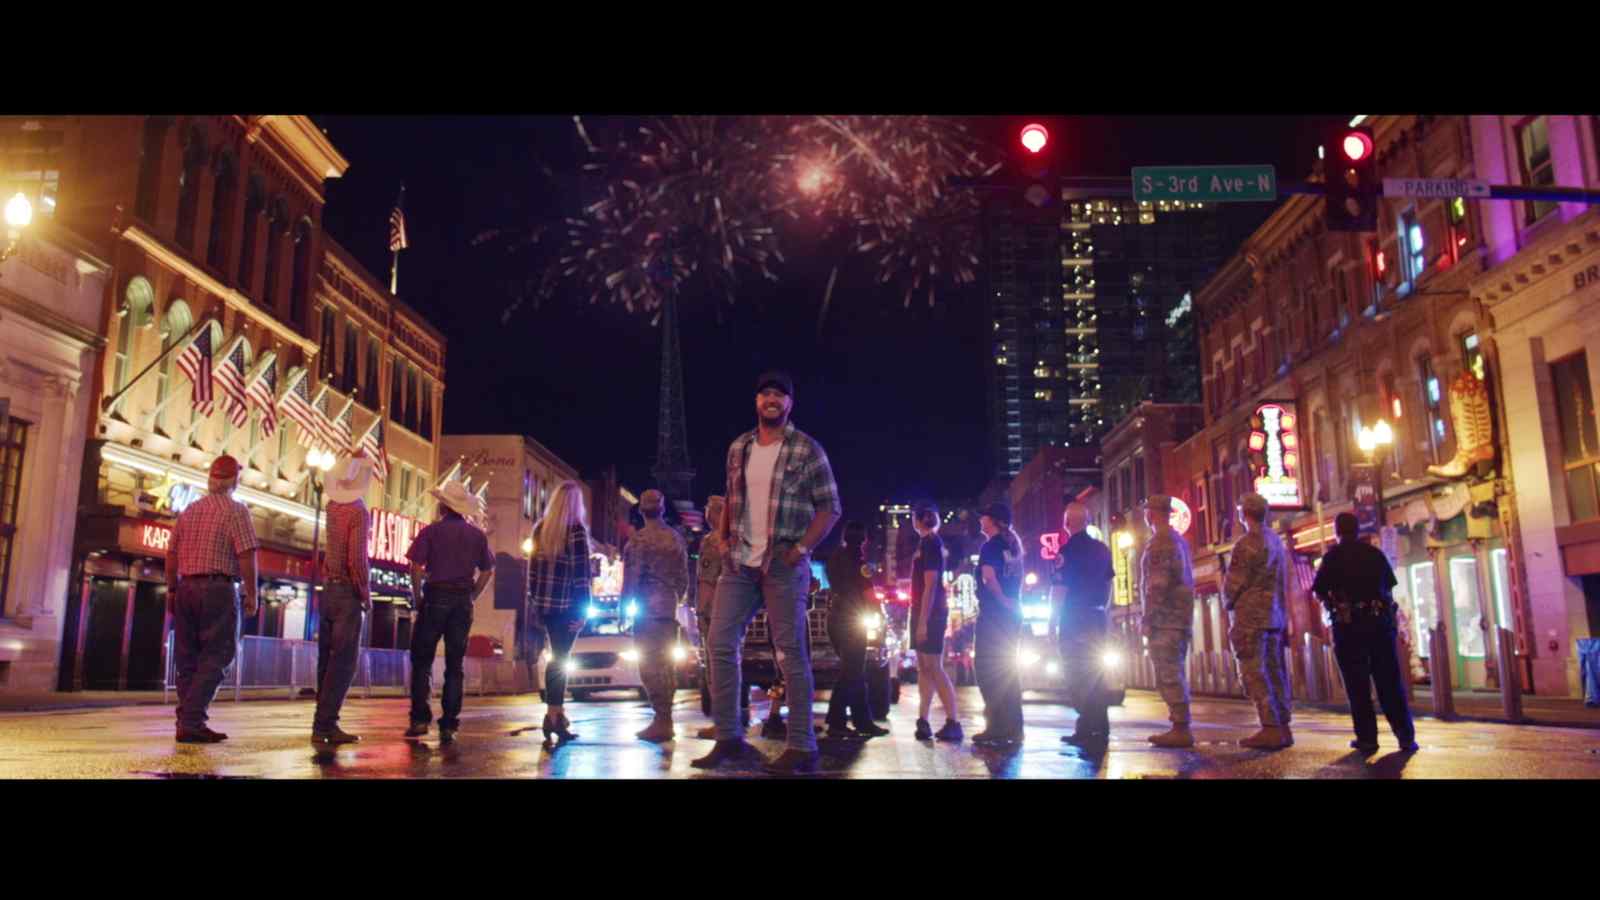 Luke Bryan Releases Video For “Country On”